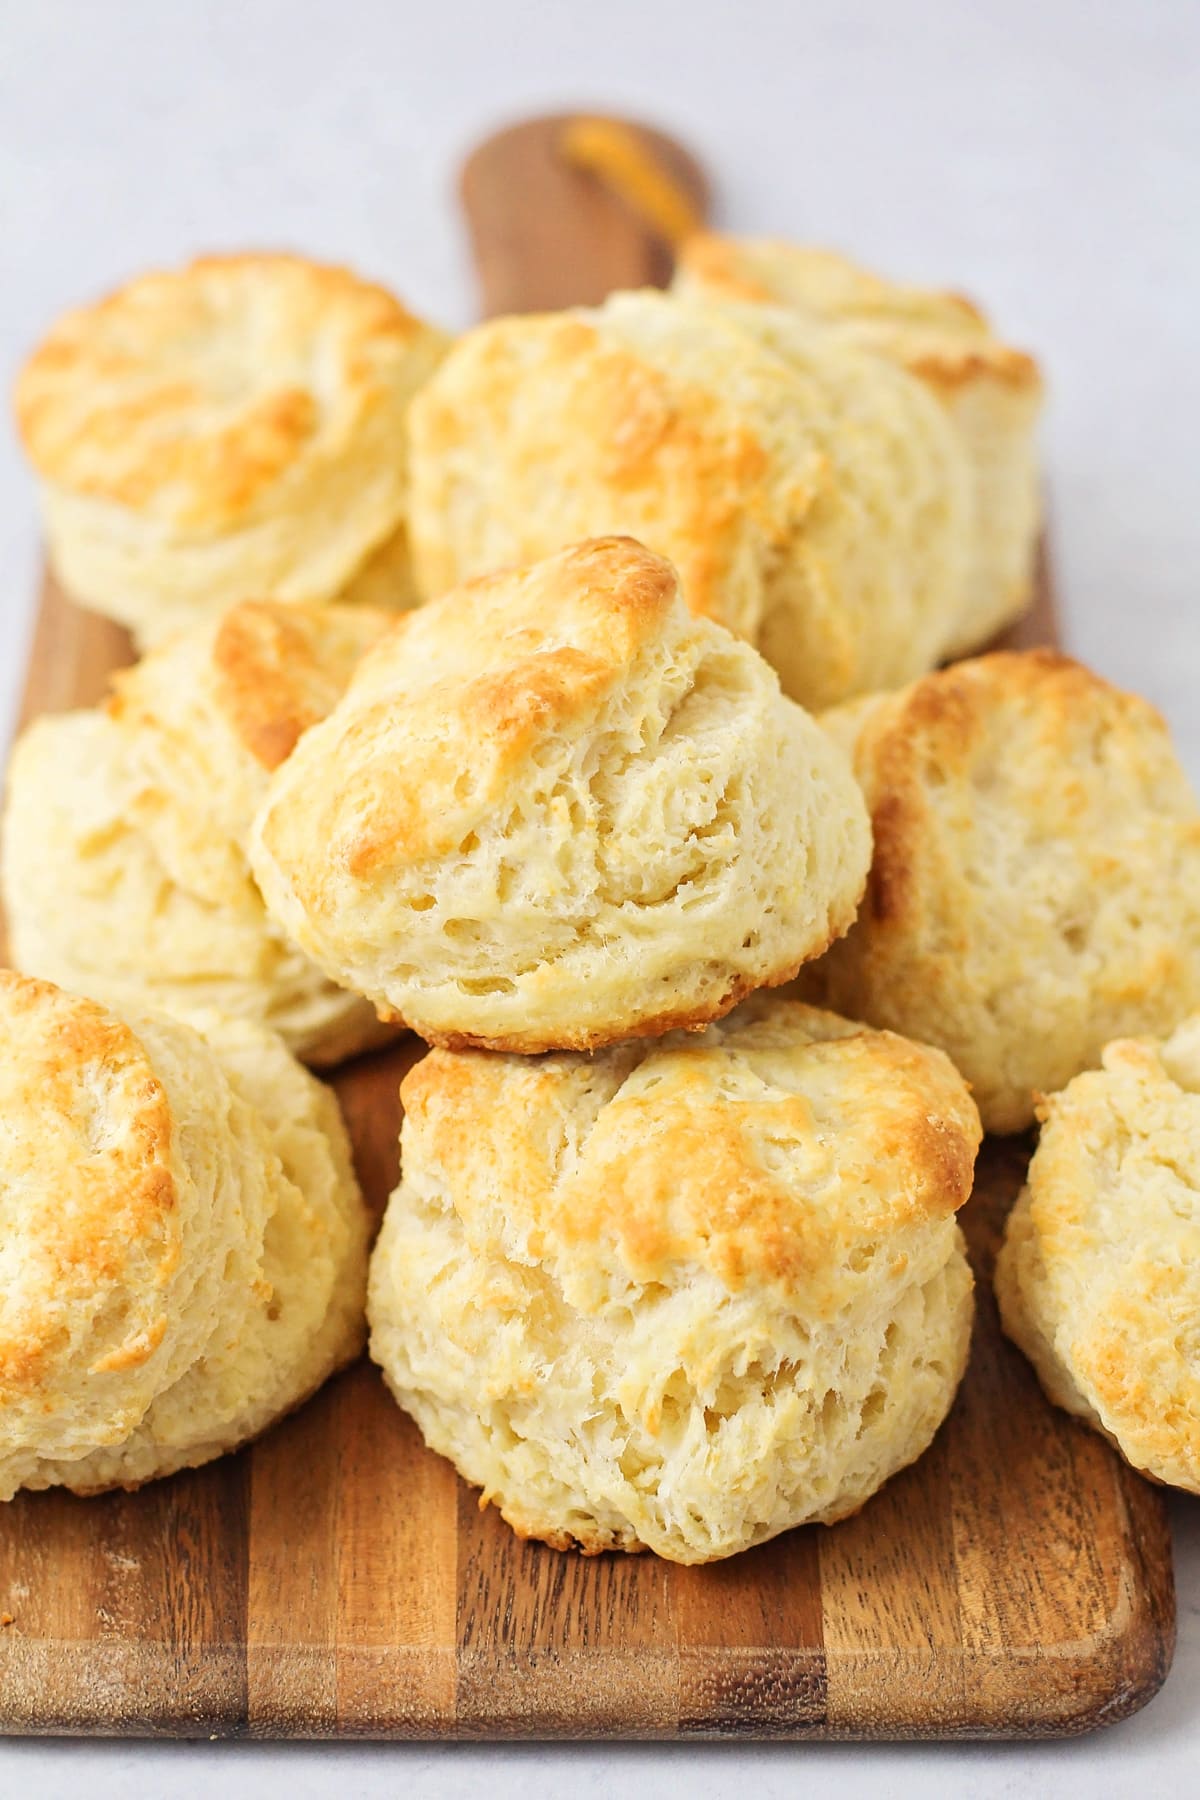 Easy biscuits piled on a wooden cutting board.